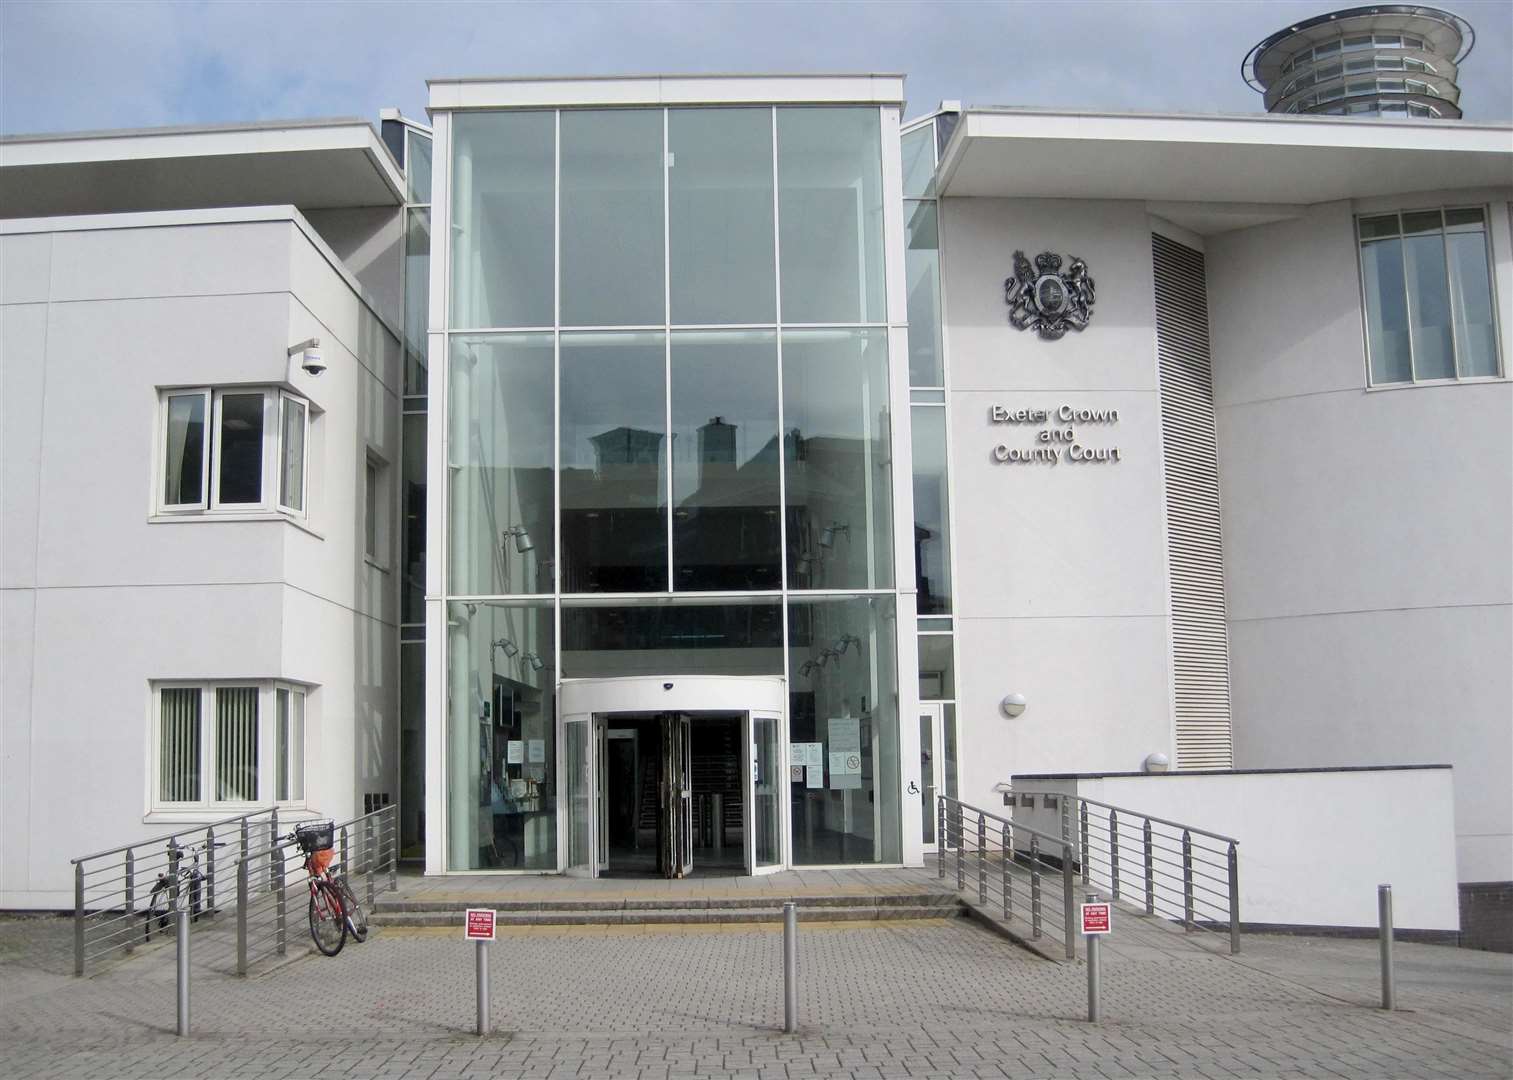 A teenager has gone on trial at Exeter Crown Court accused of attempting to murder two boys and a housemaster at Blundell’s School in Devon (David Wilcock/PA)